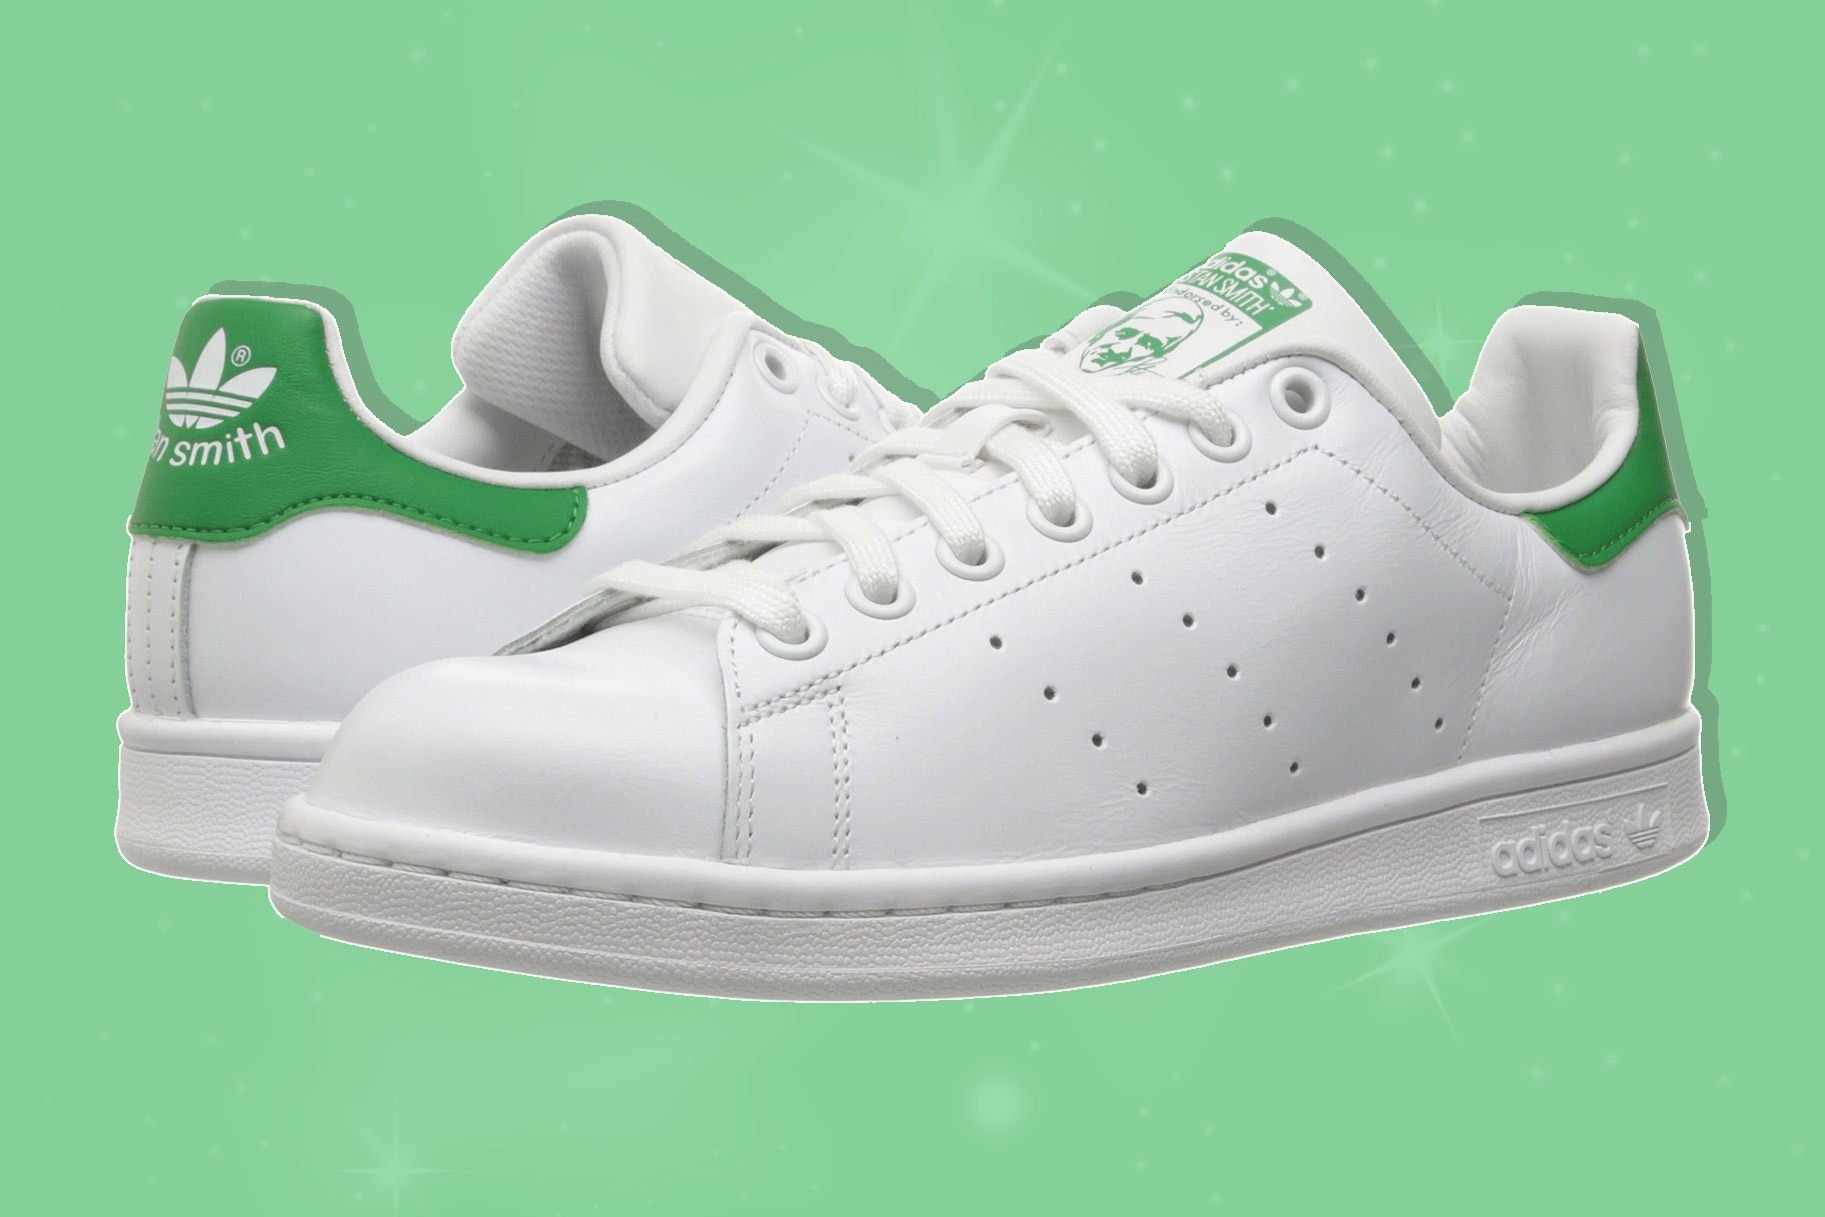 stan smith in real life